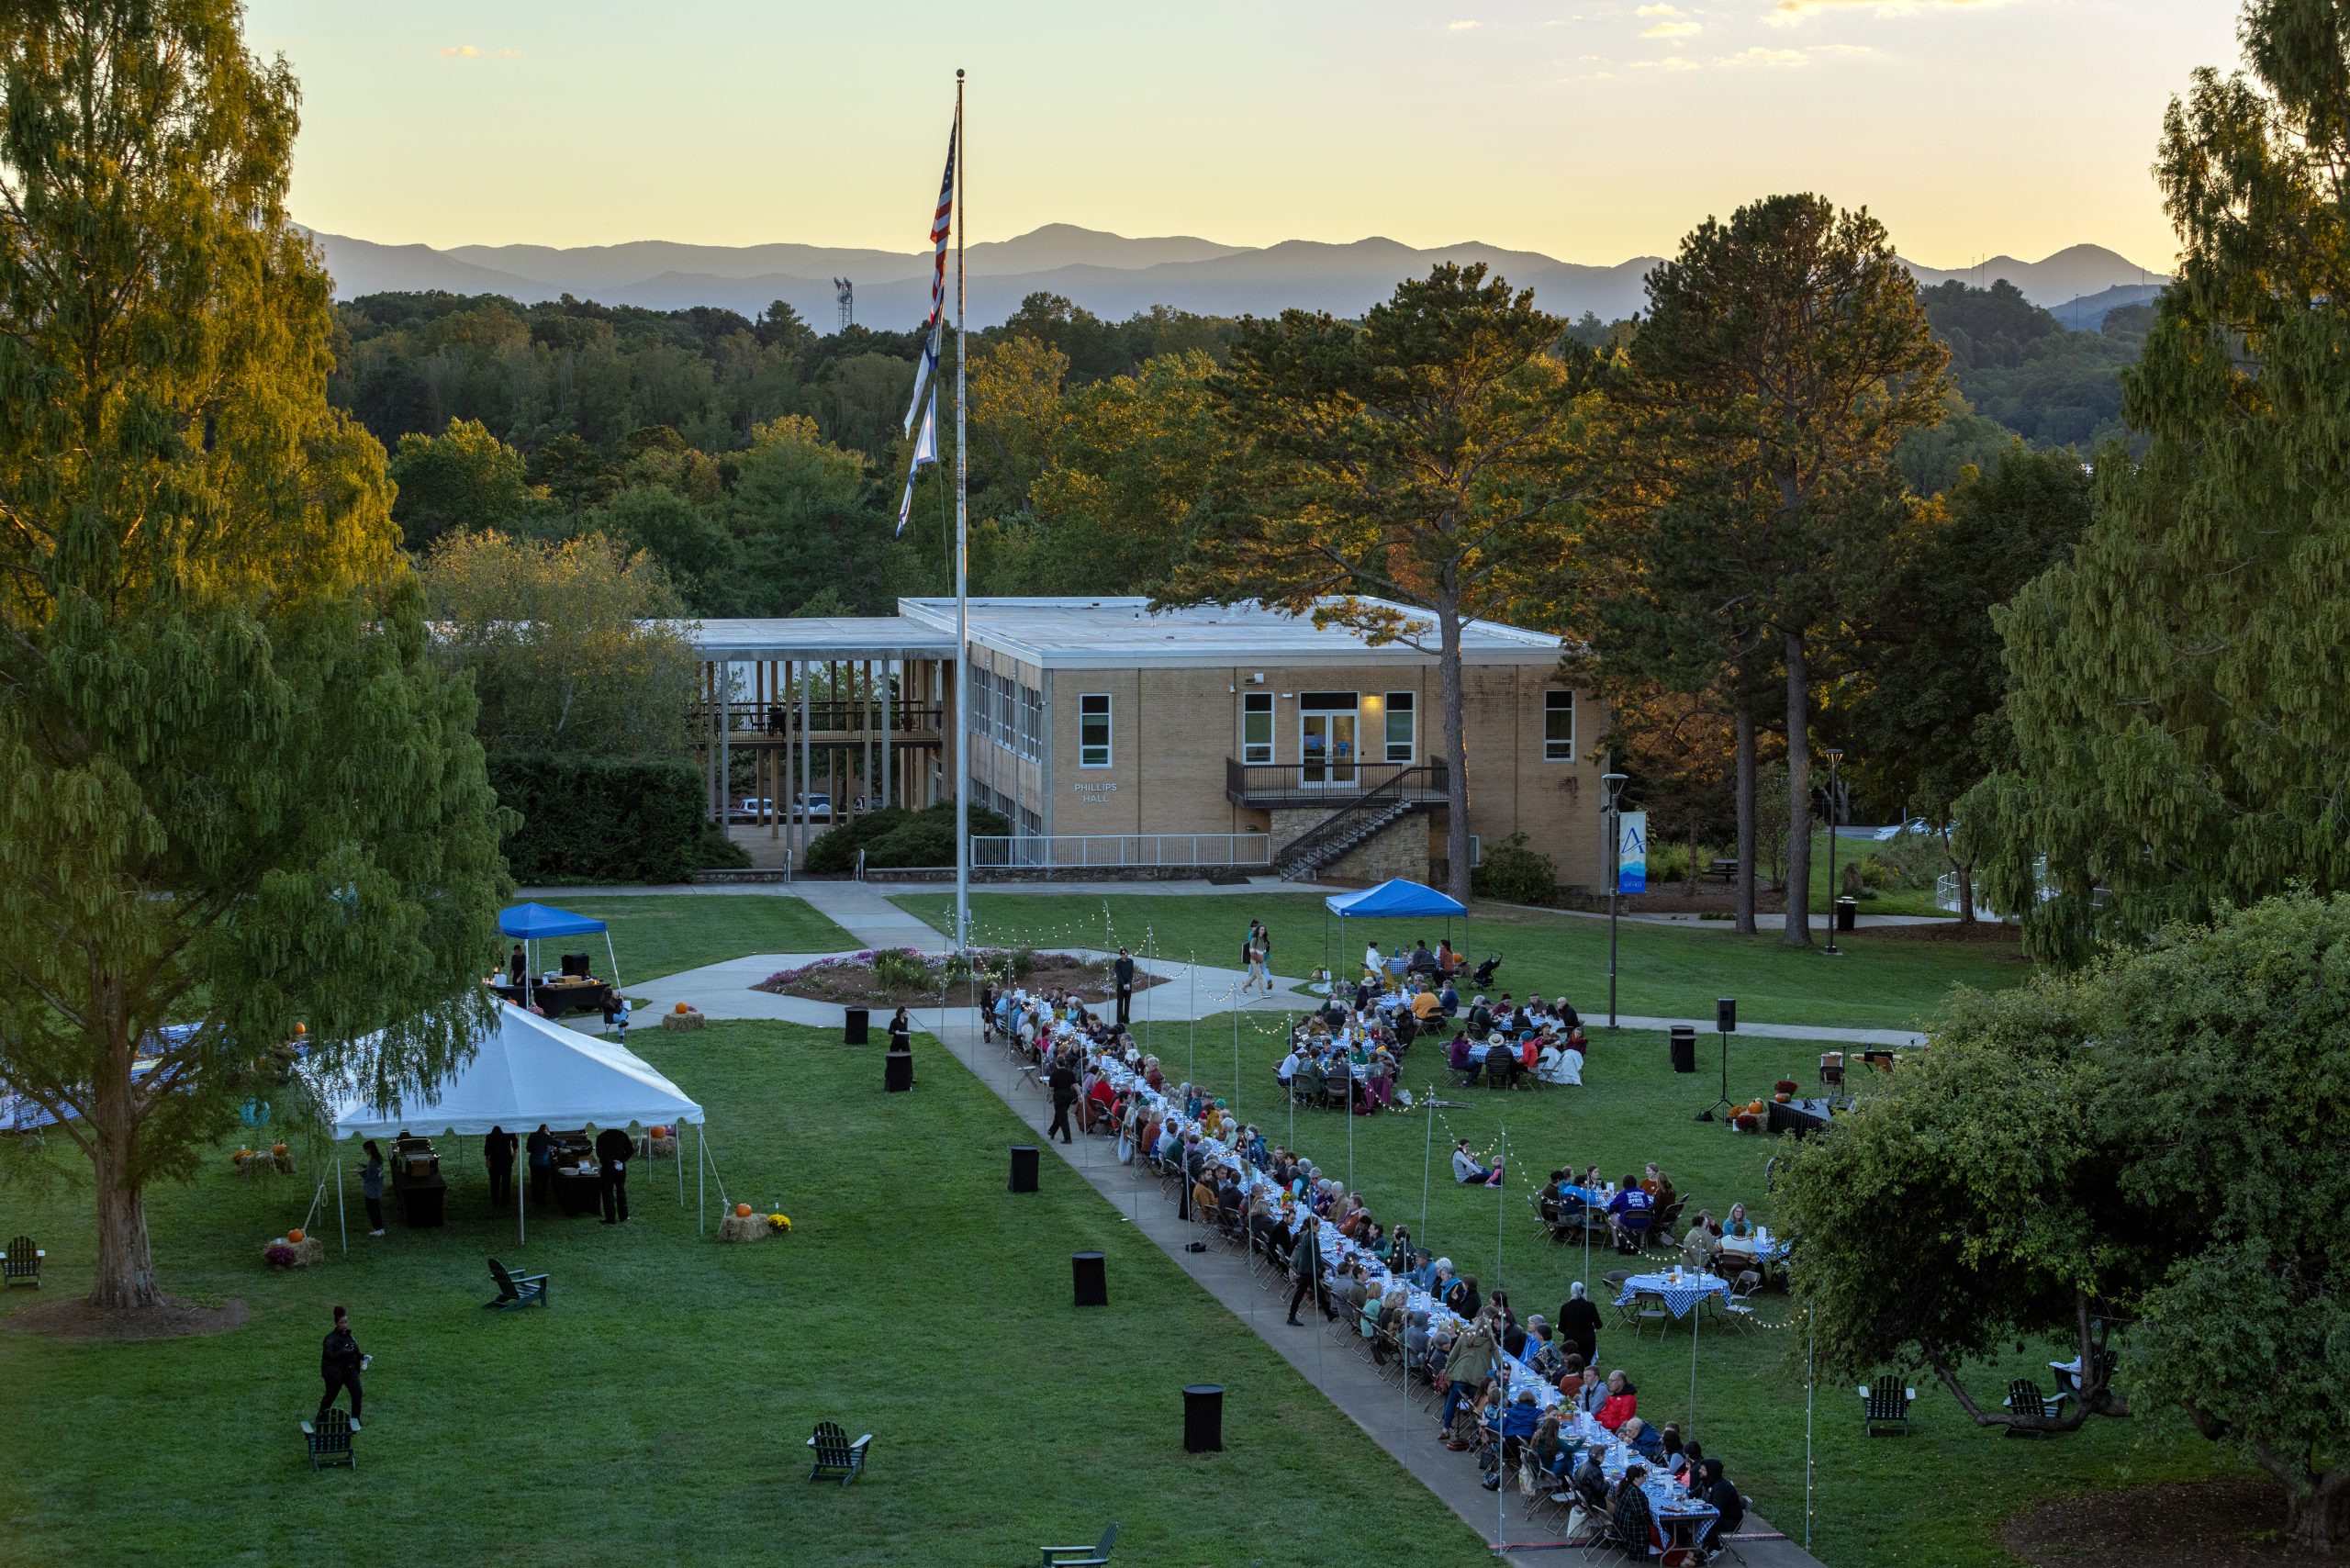 Overhead view of the quad during the farm to table event